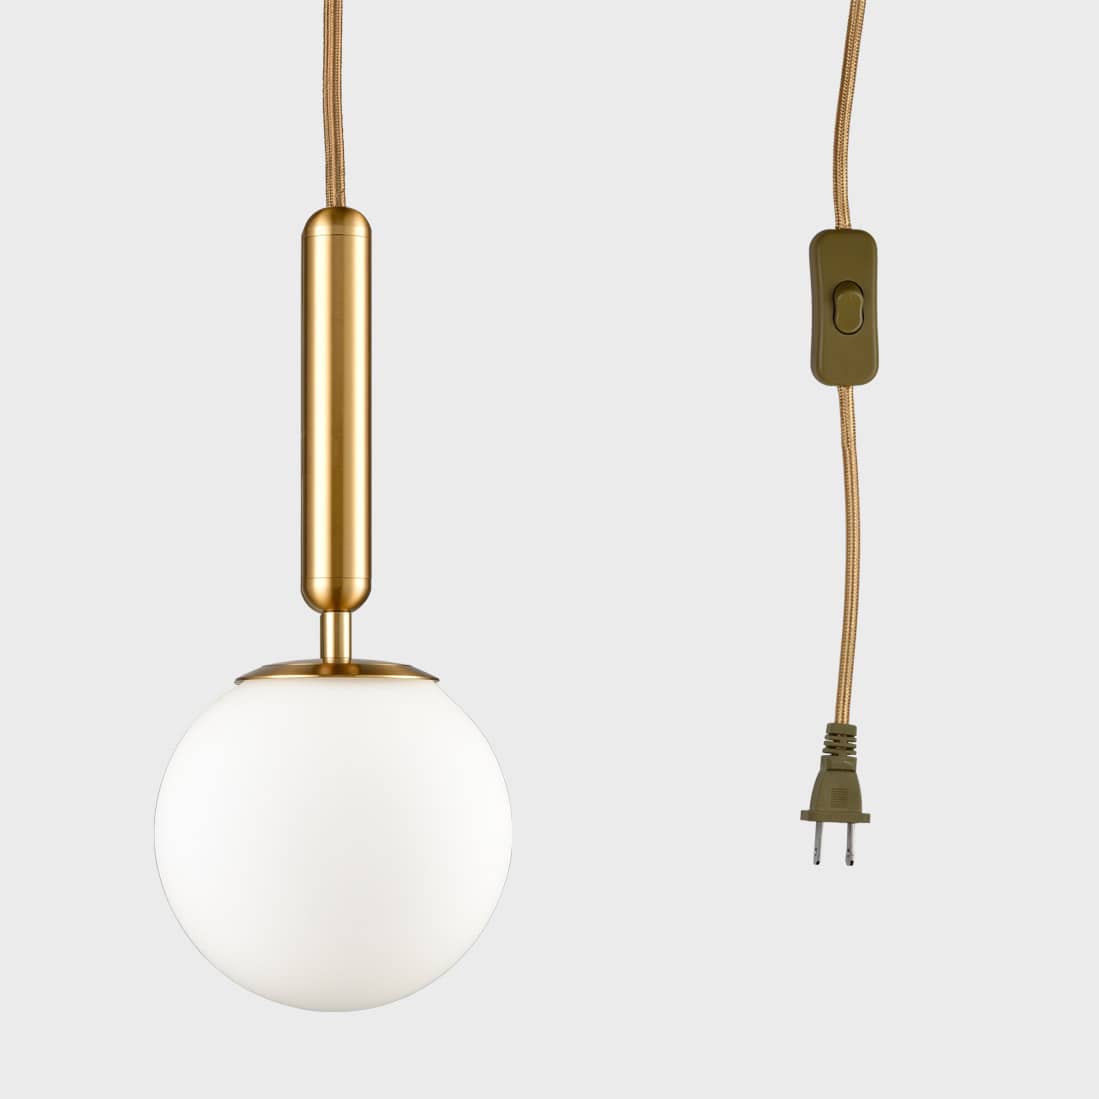 Modern Gold Plug in Pendant Lighting with Switch Cord 6 Inch